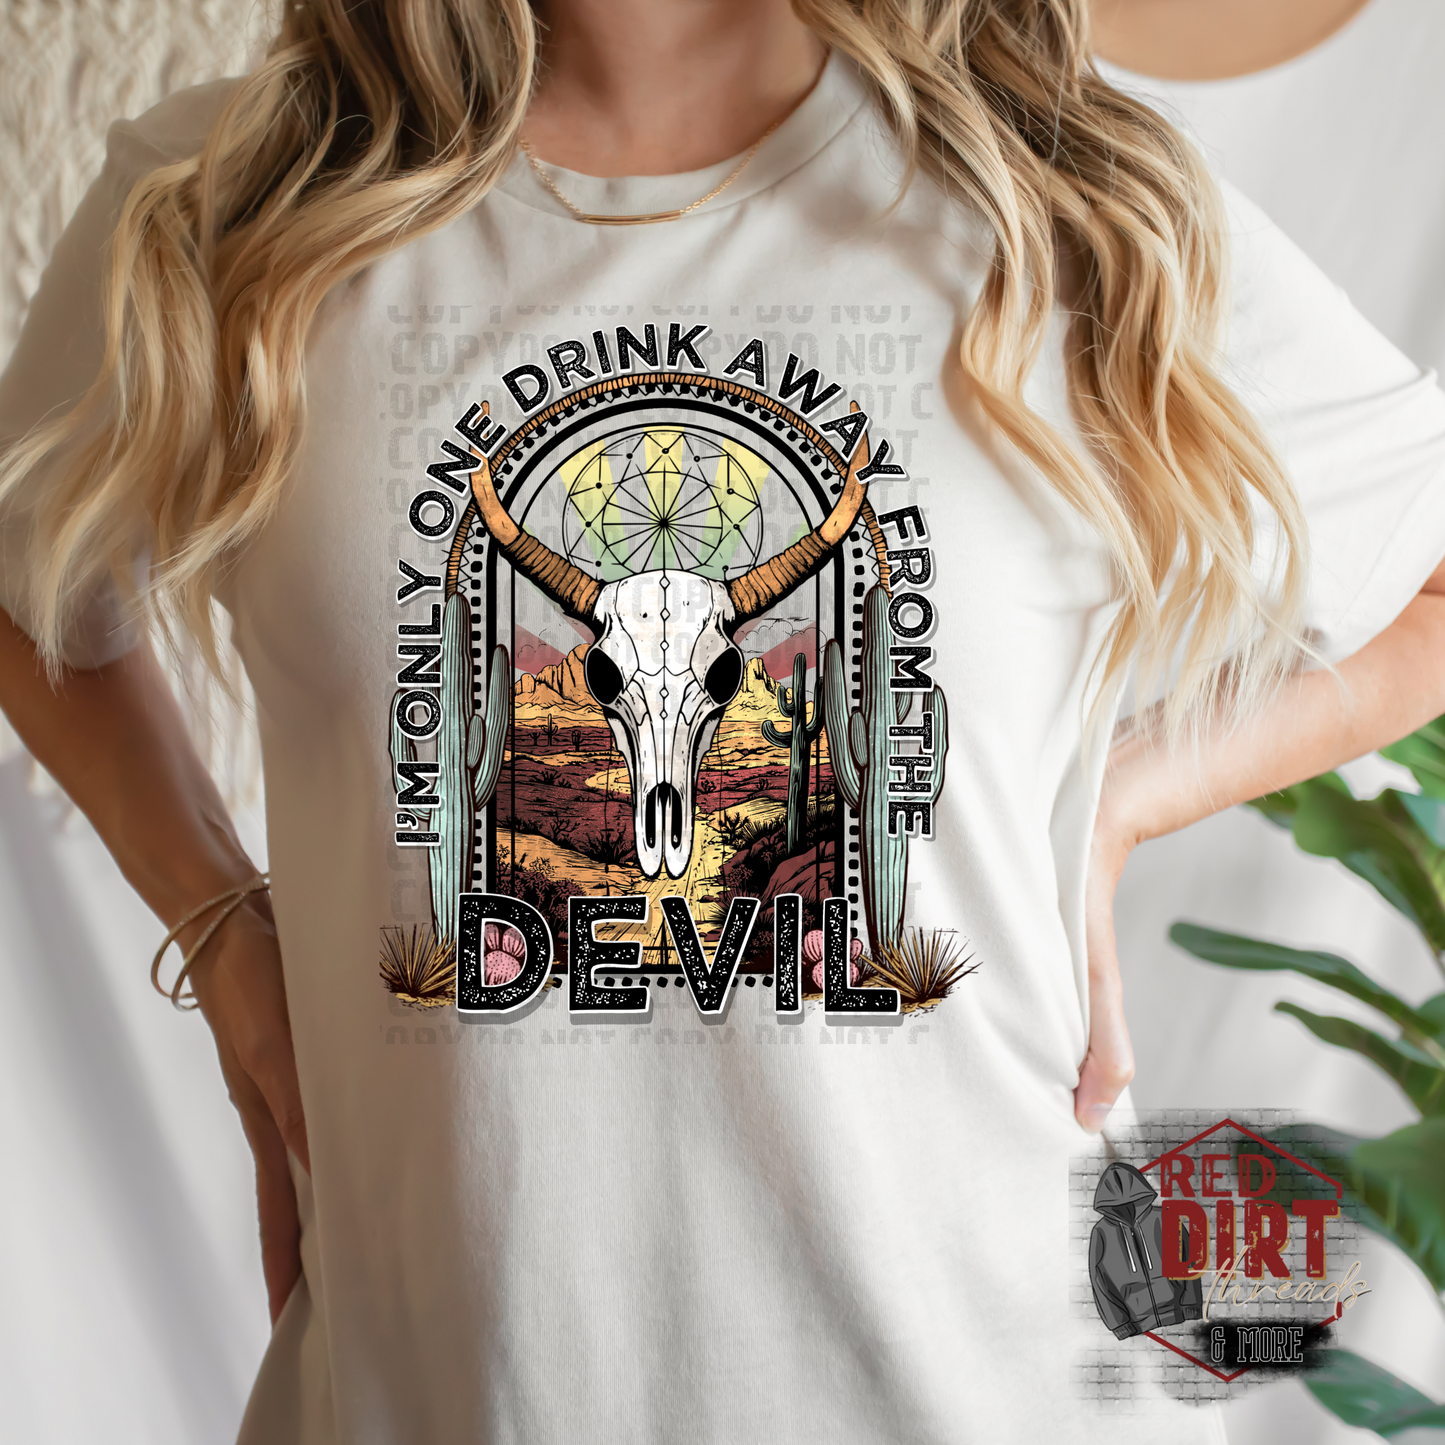 One Drink Away DTF Transfer | Country Music DTF Print | Ready to Press Transfers | High Quality DTF Transfers | Fast Shipping